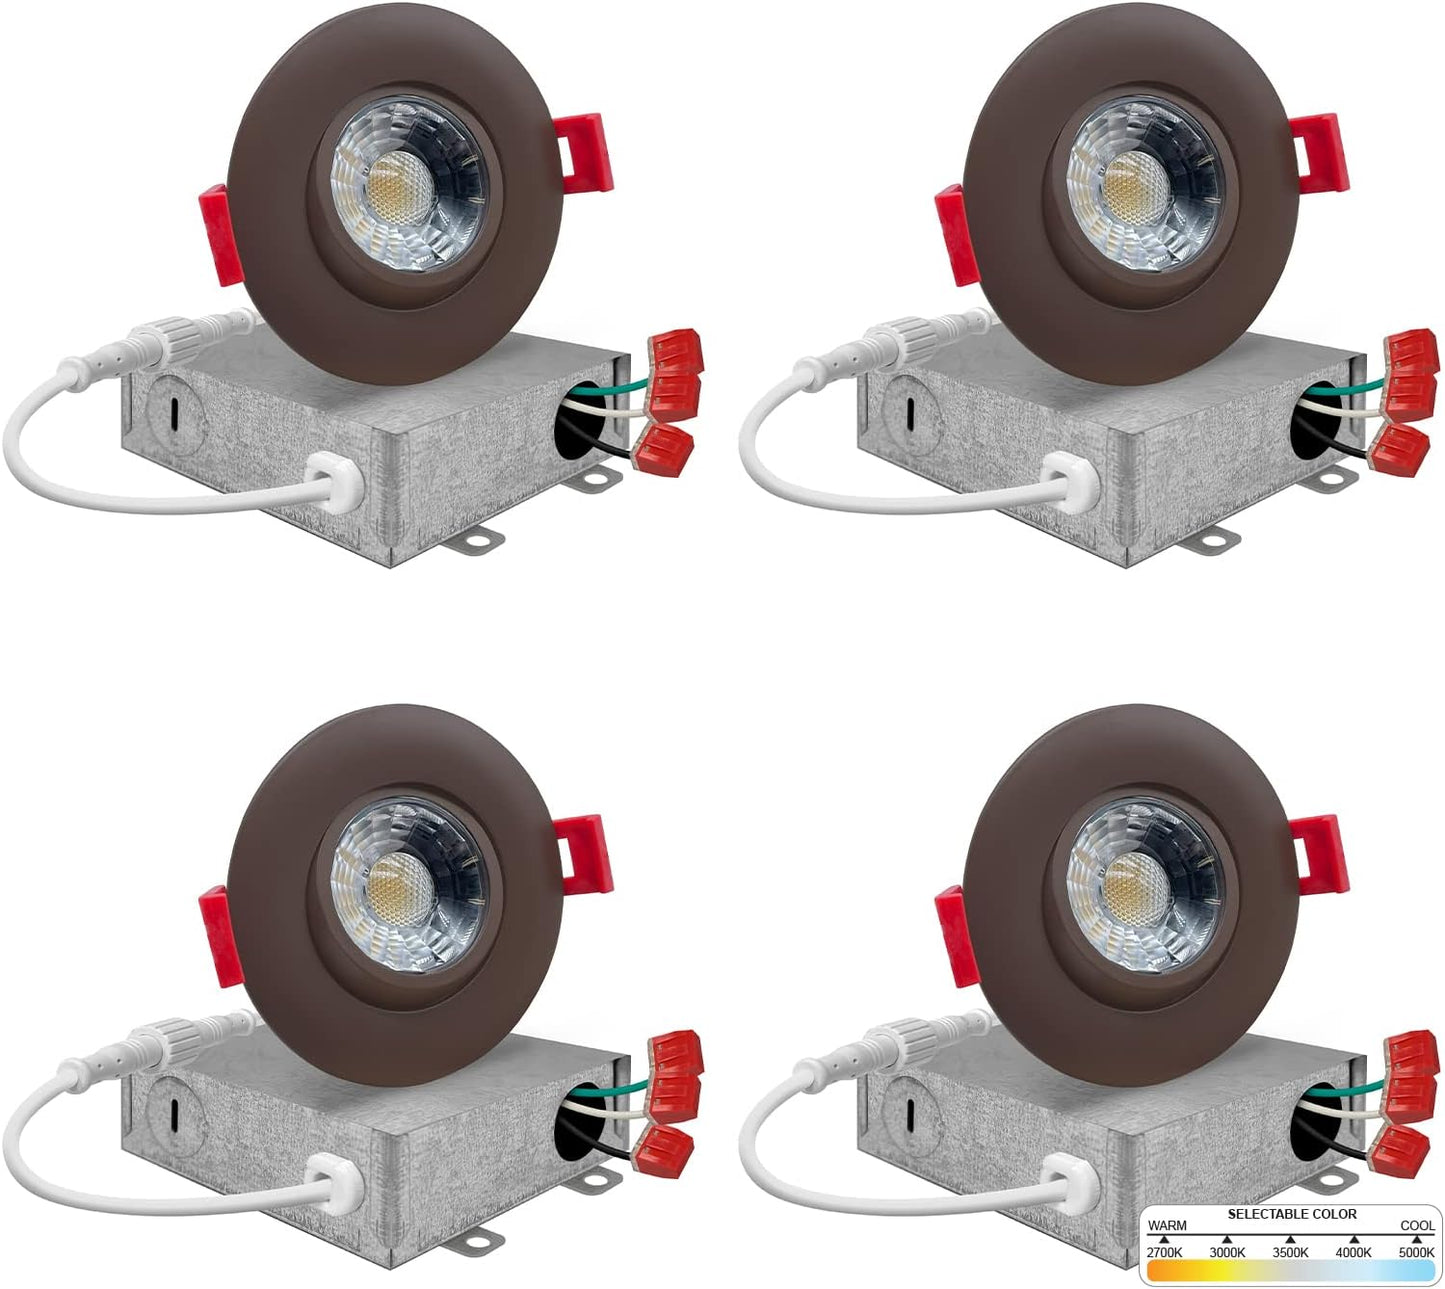 NUWATT 3 Inch LED Gimbal Recessed Downlight, 4 Pack, Canless All-in-1 LED Light with 5 CCT Color Switch 2700K - 5000K, 8W, 600 Lumens, 120V, Dimmable, Matte Bronze Finish